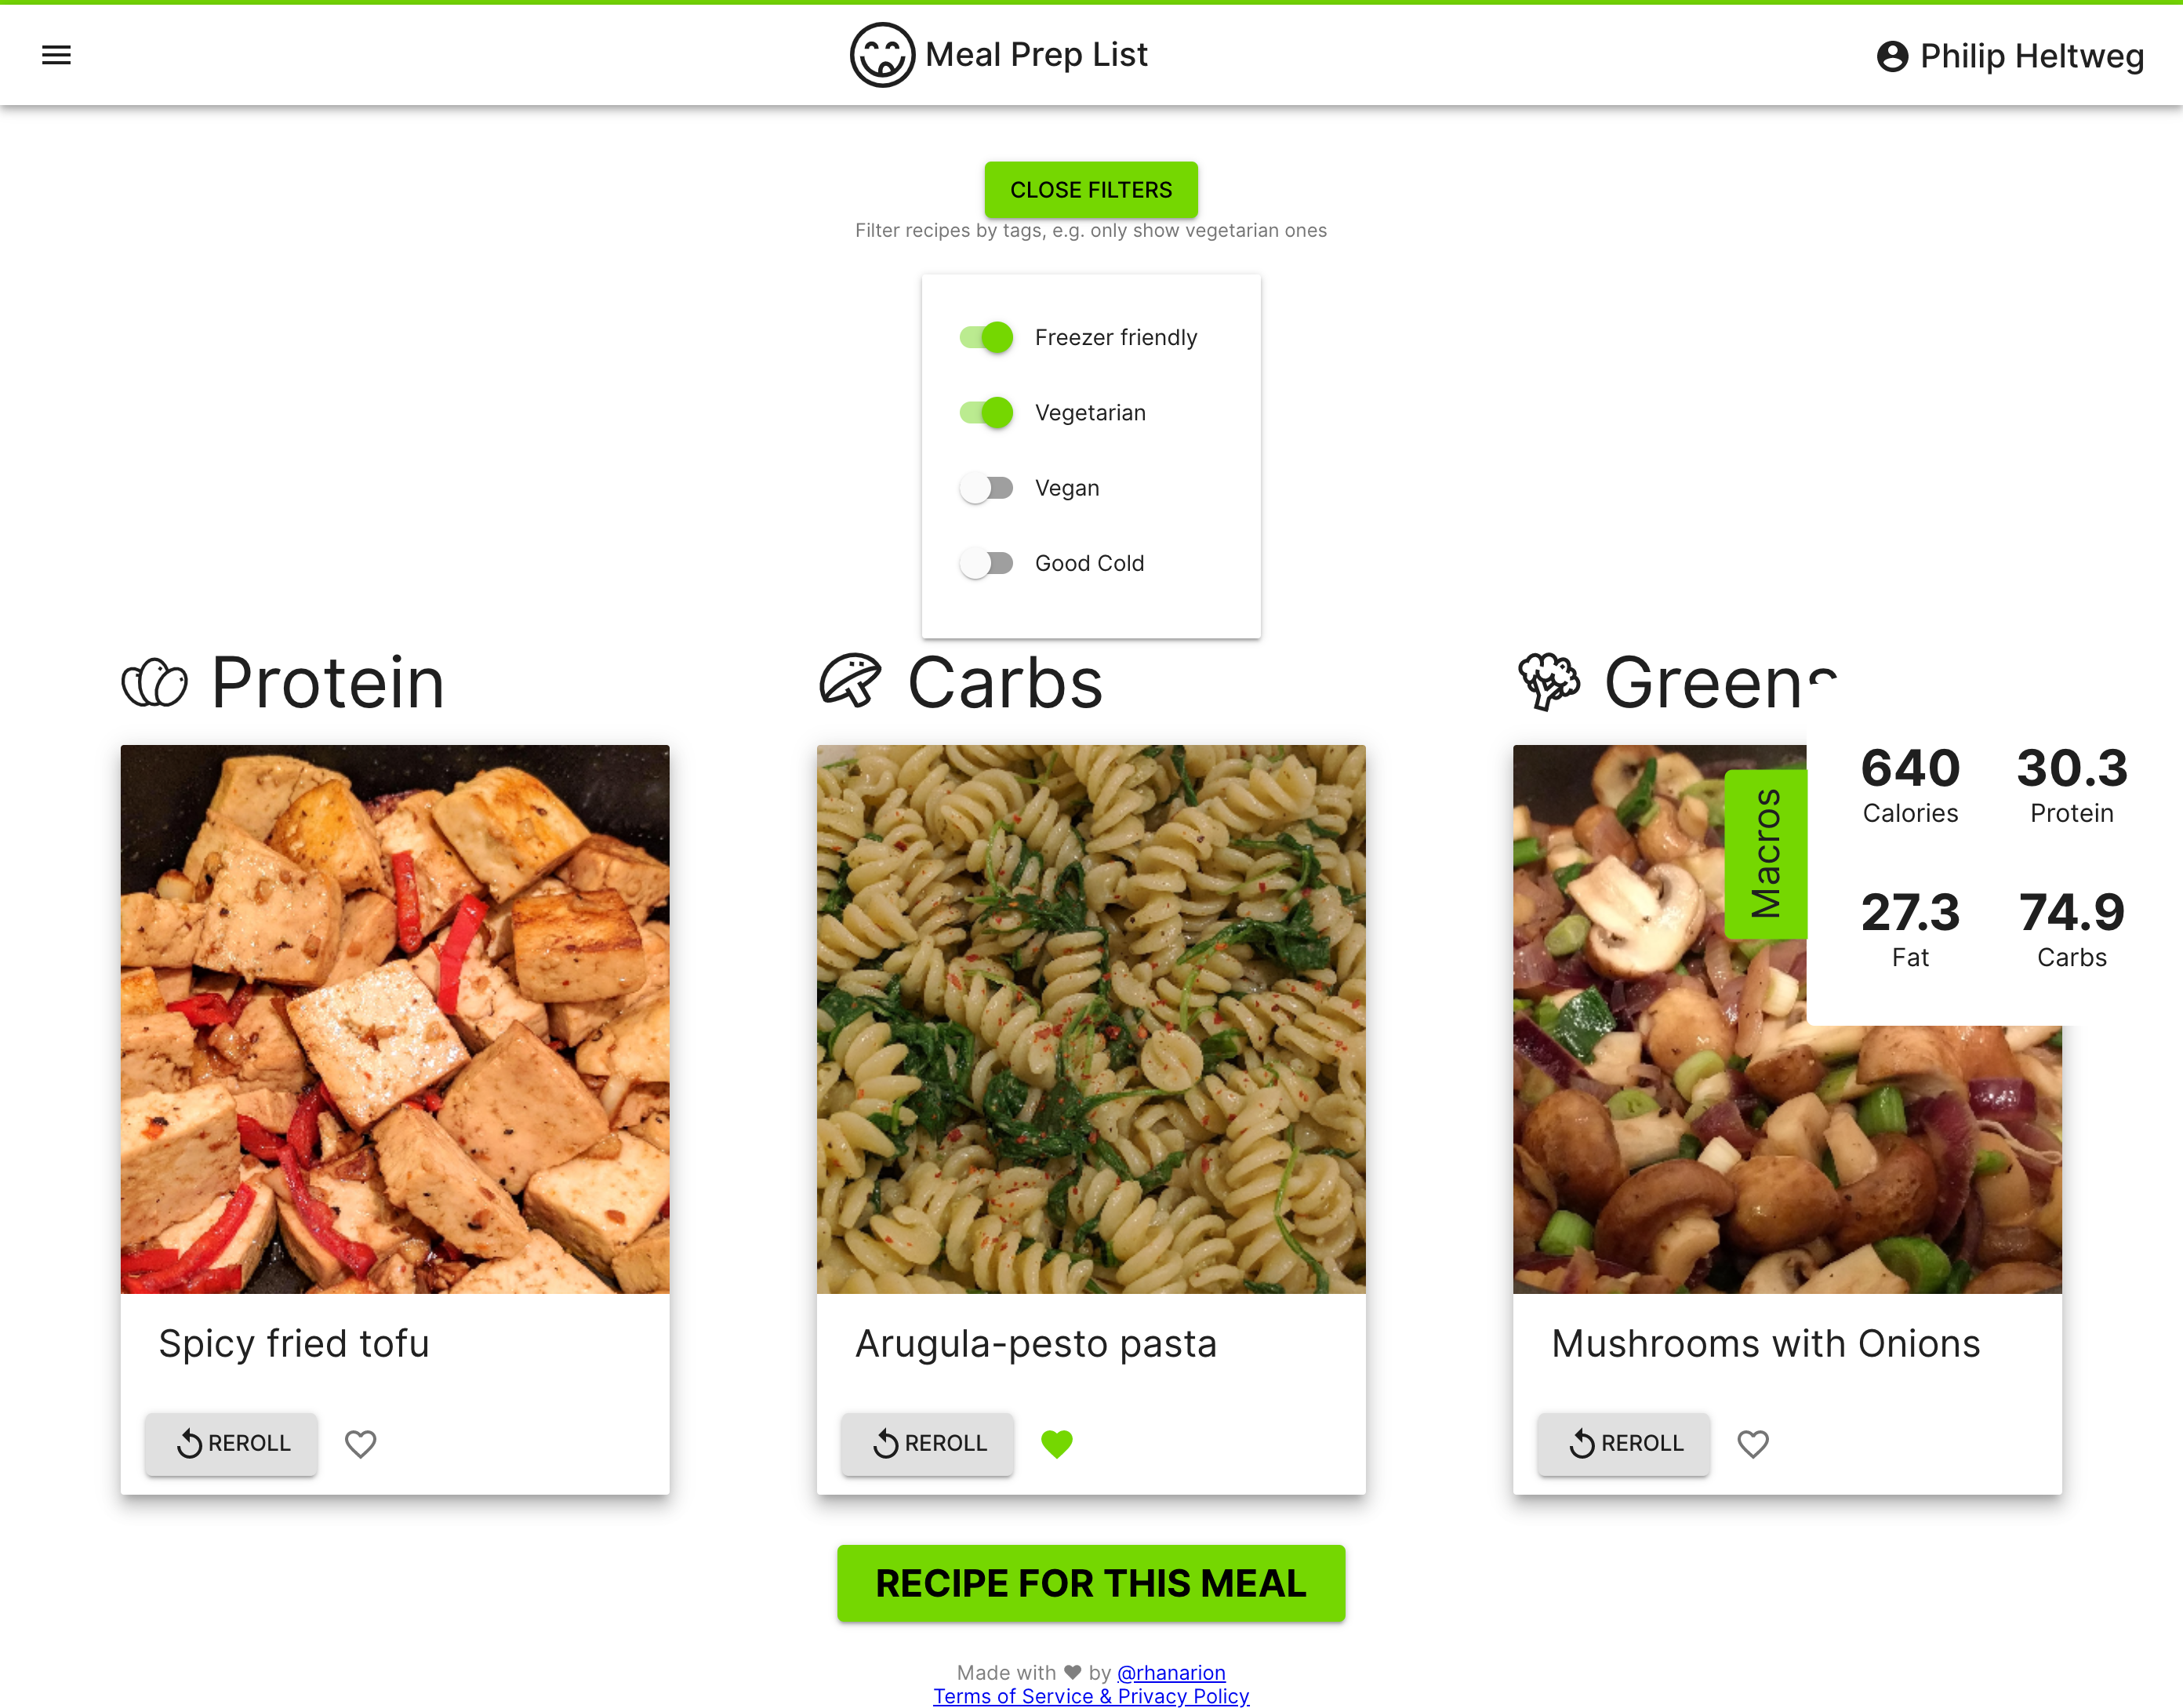 Premium users can filter recipes by tags and see combined macros